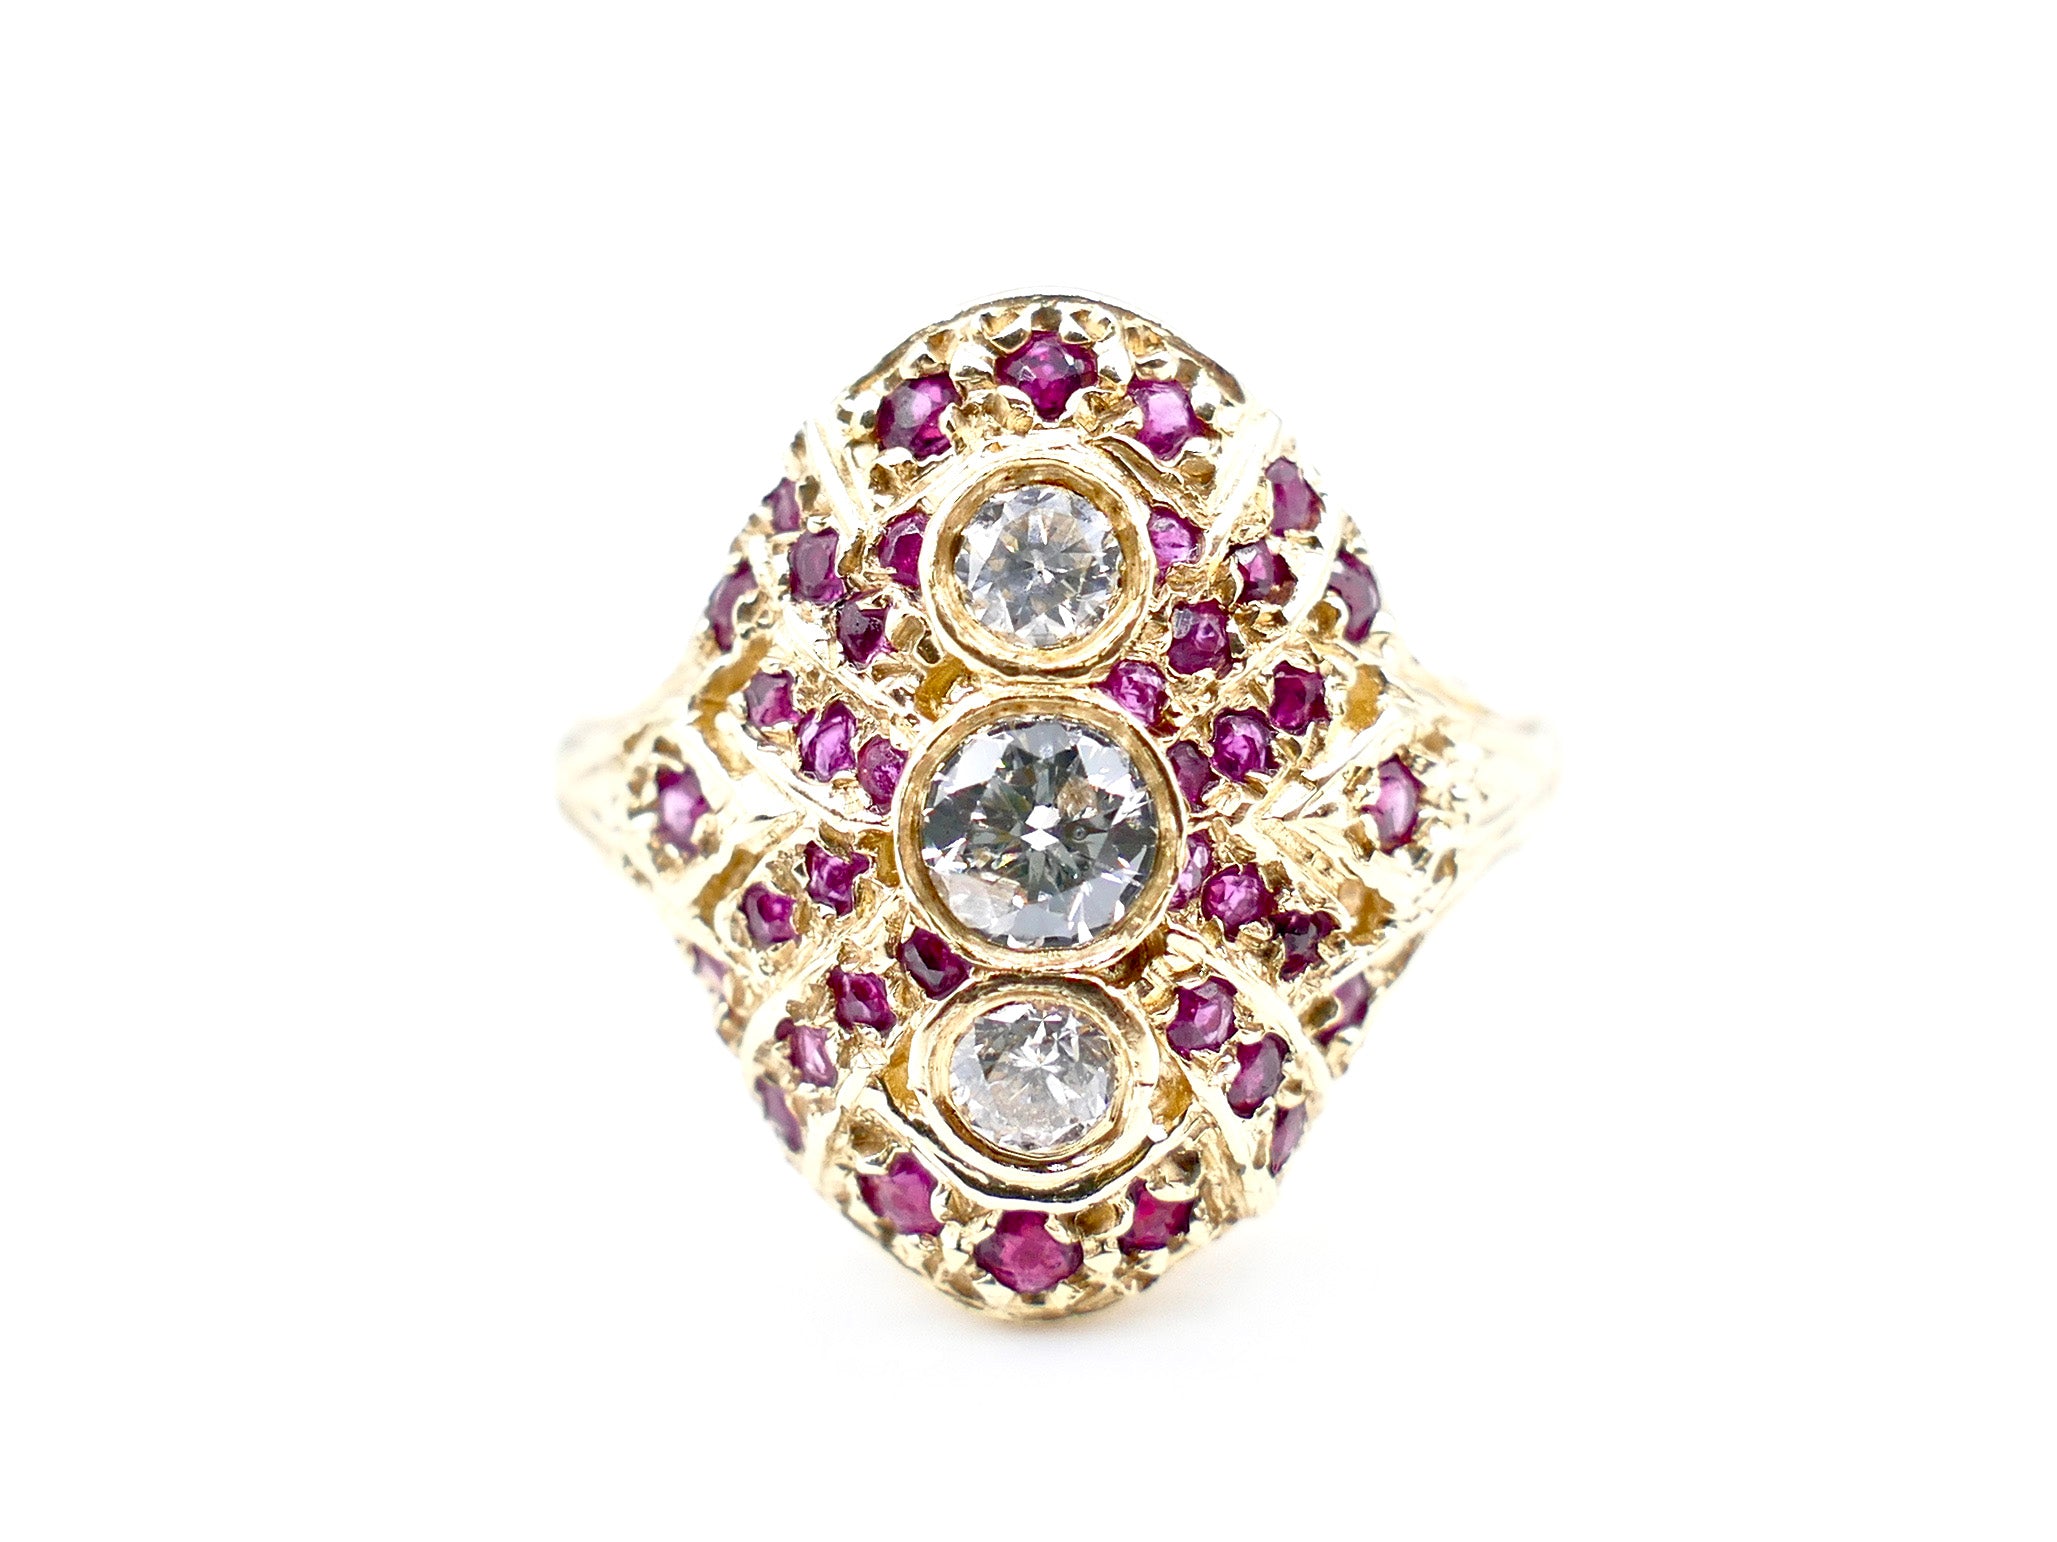 Antique Style 3 Diamond and Rubies 14K Yellow Gold Ring